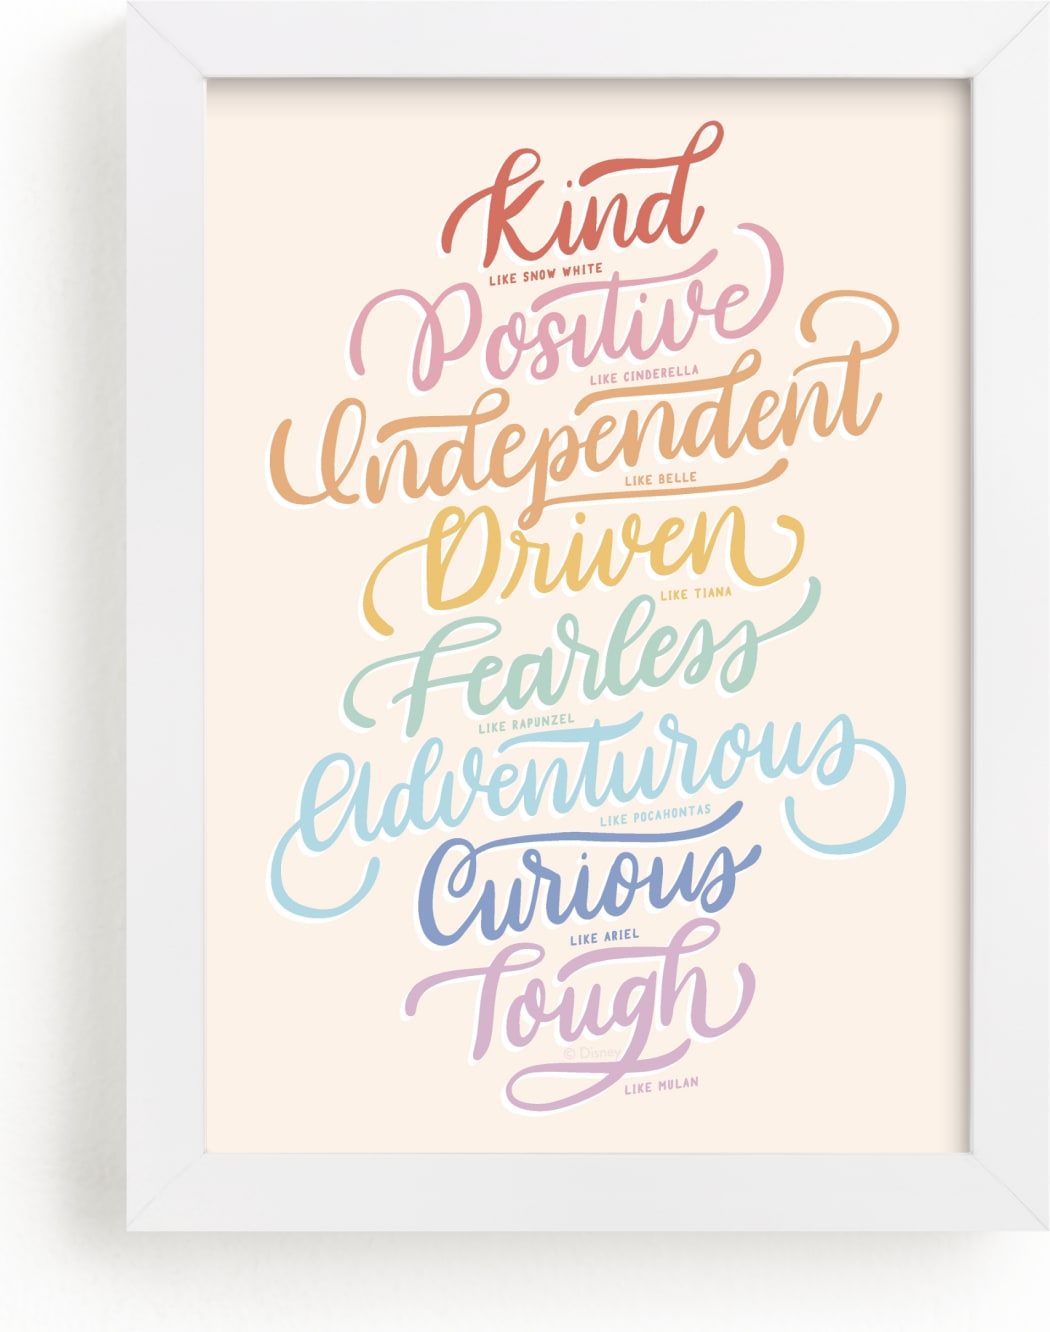 This is a colorful disney art by Carolyn Kach called Disney Princess Traits.